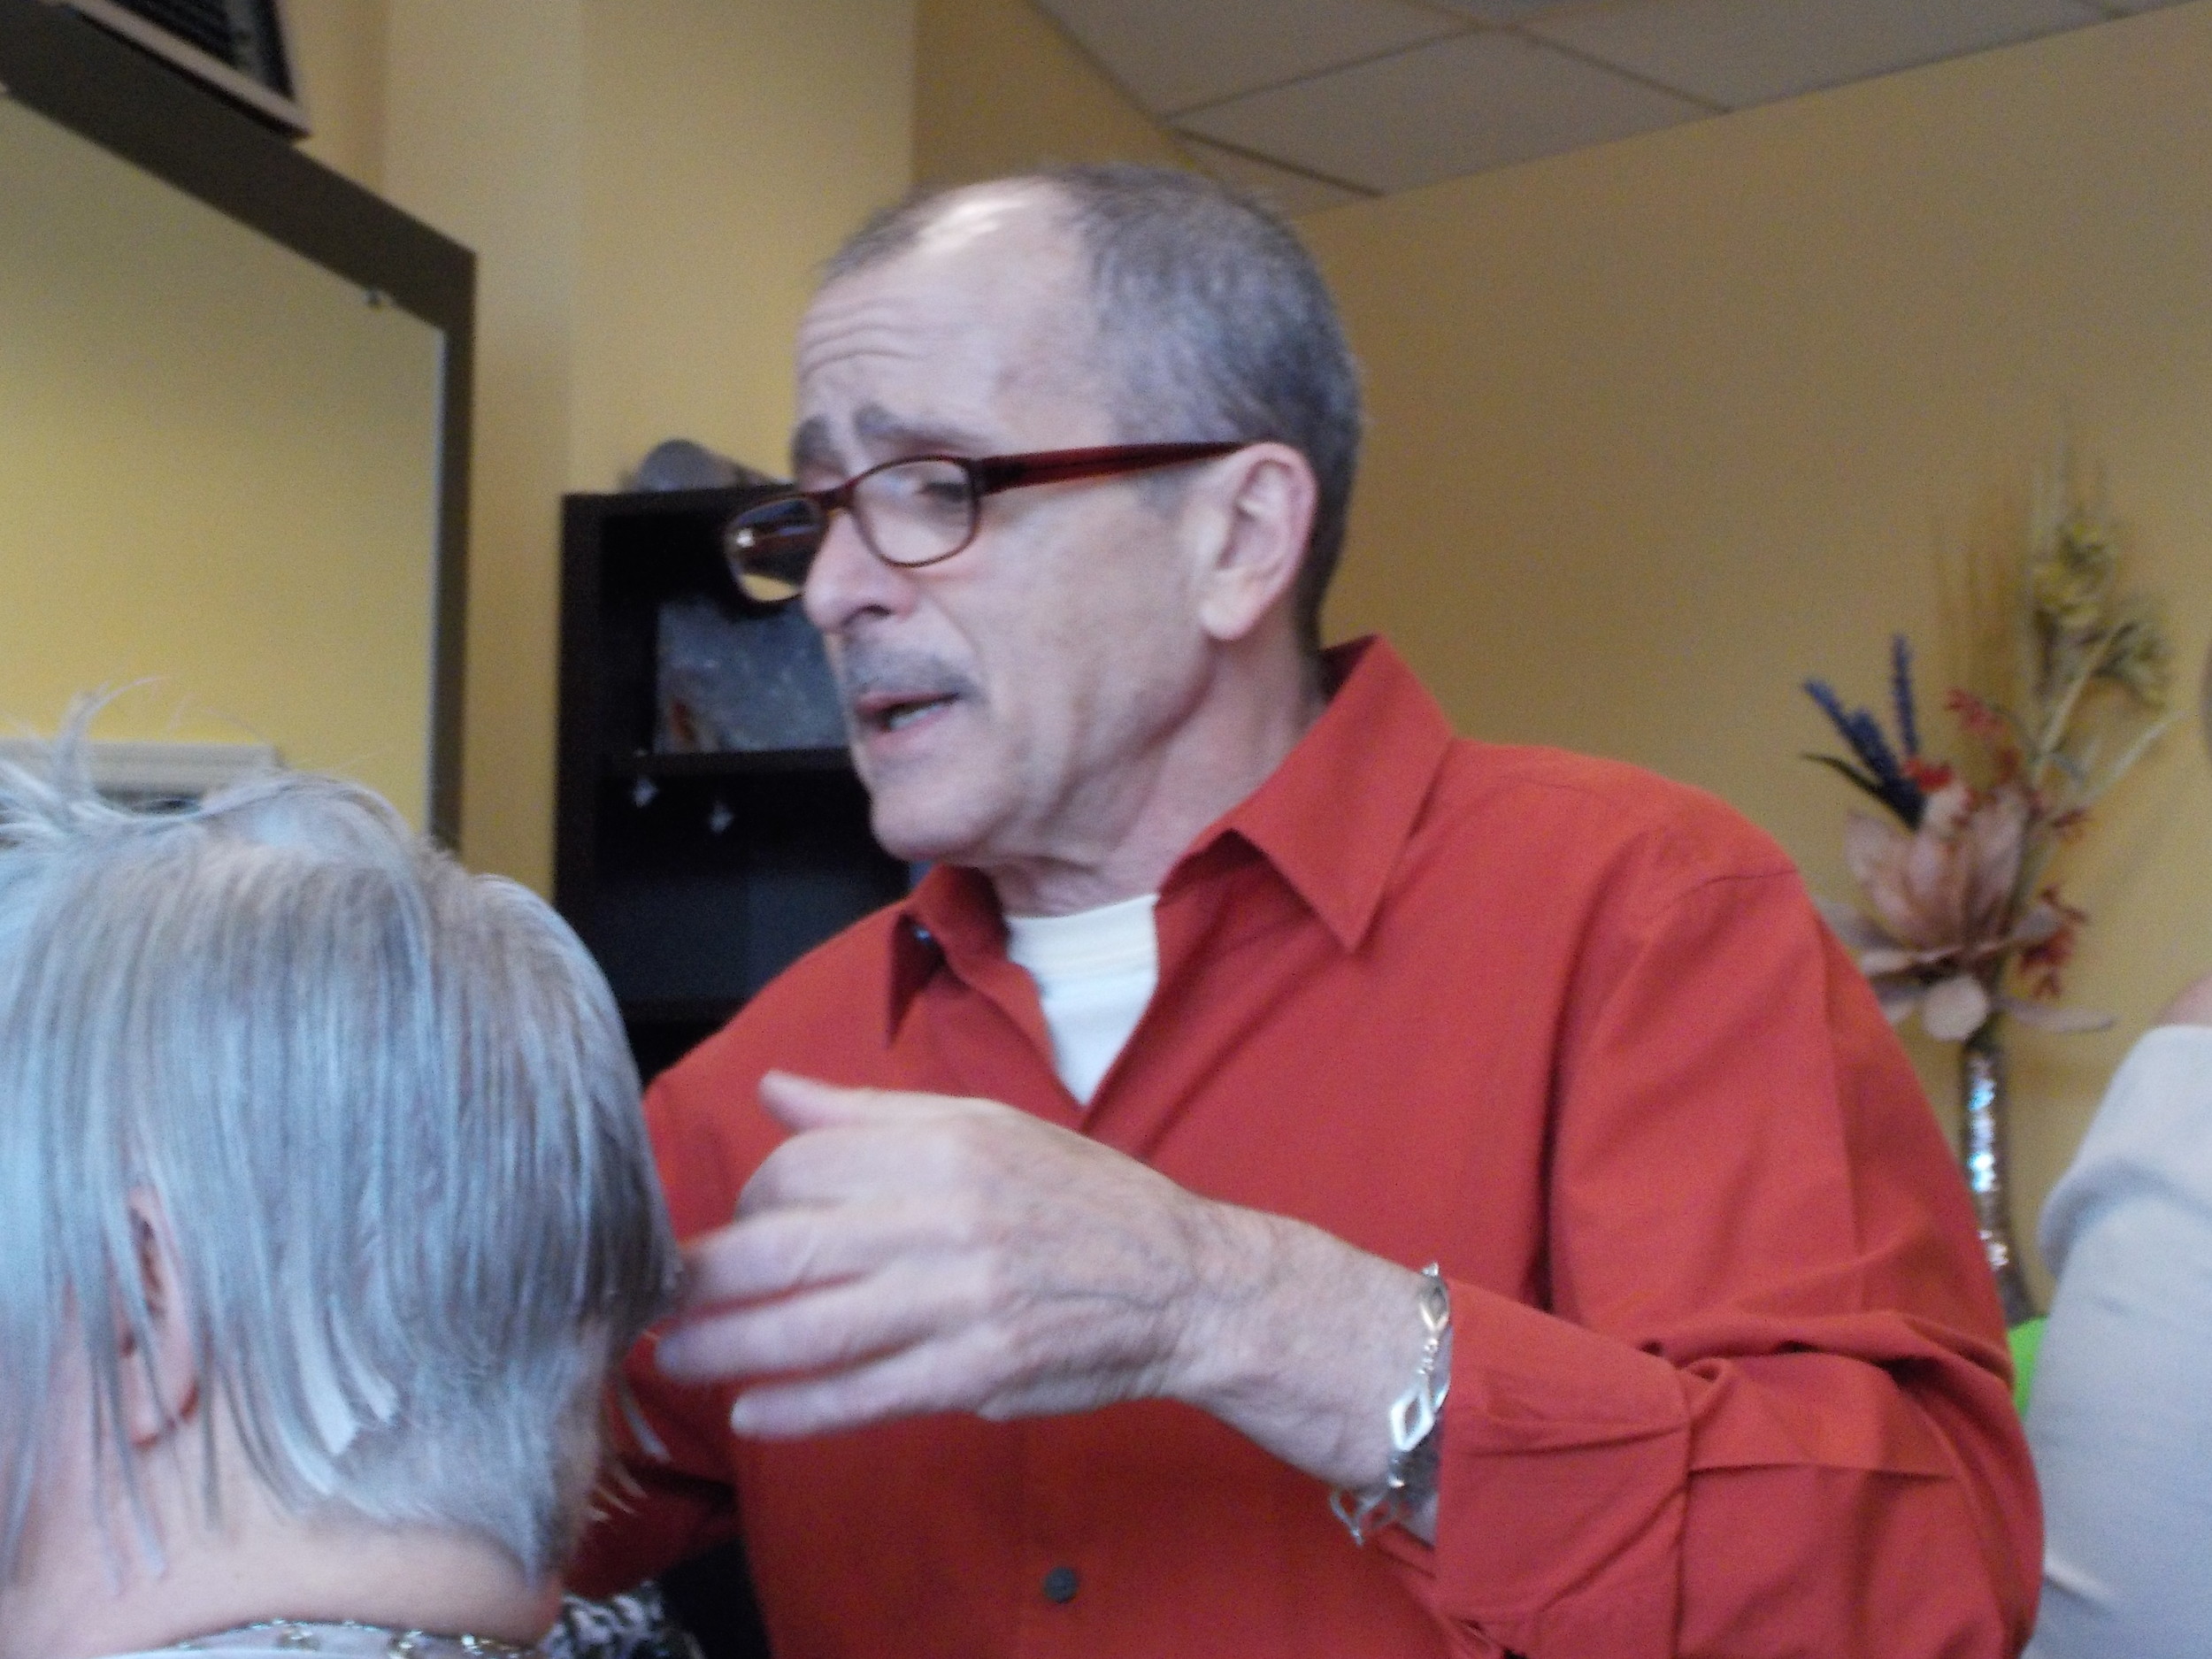 Tony Sarica has cut hair for 46 years, 43 of them in Lynbrook.